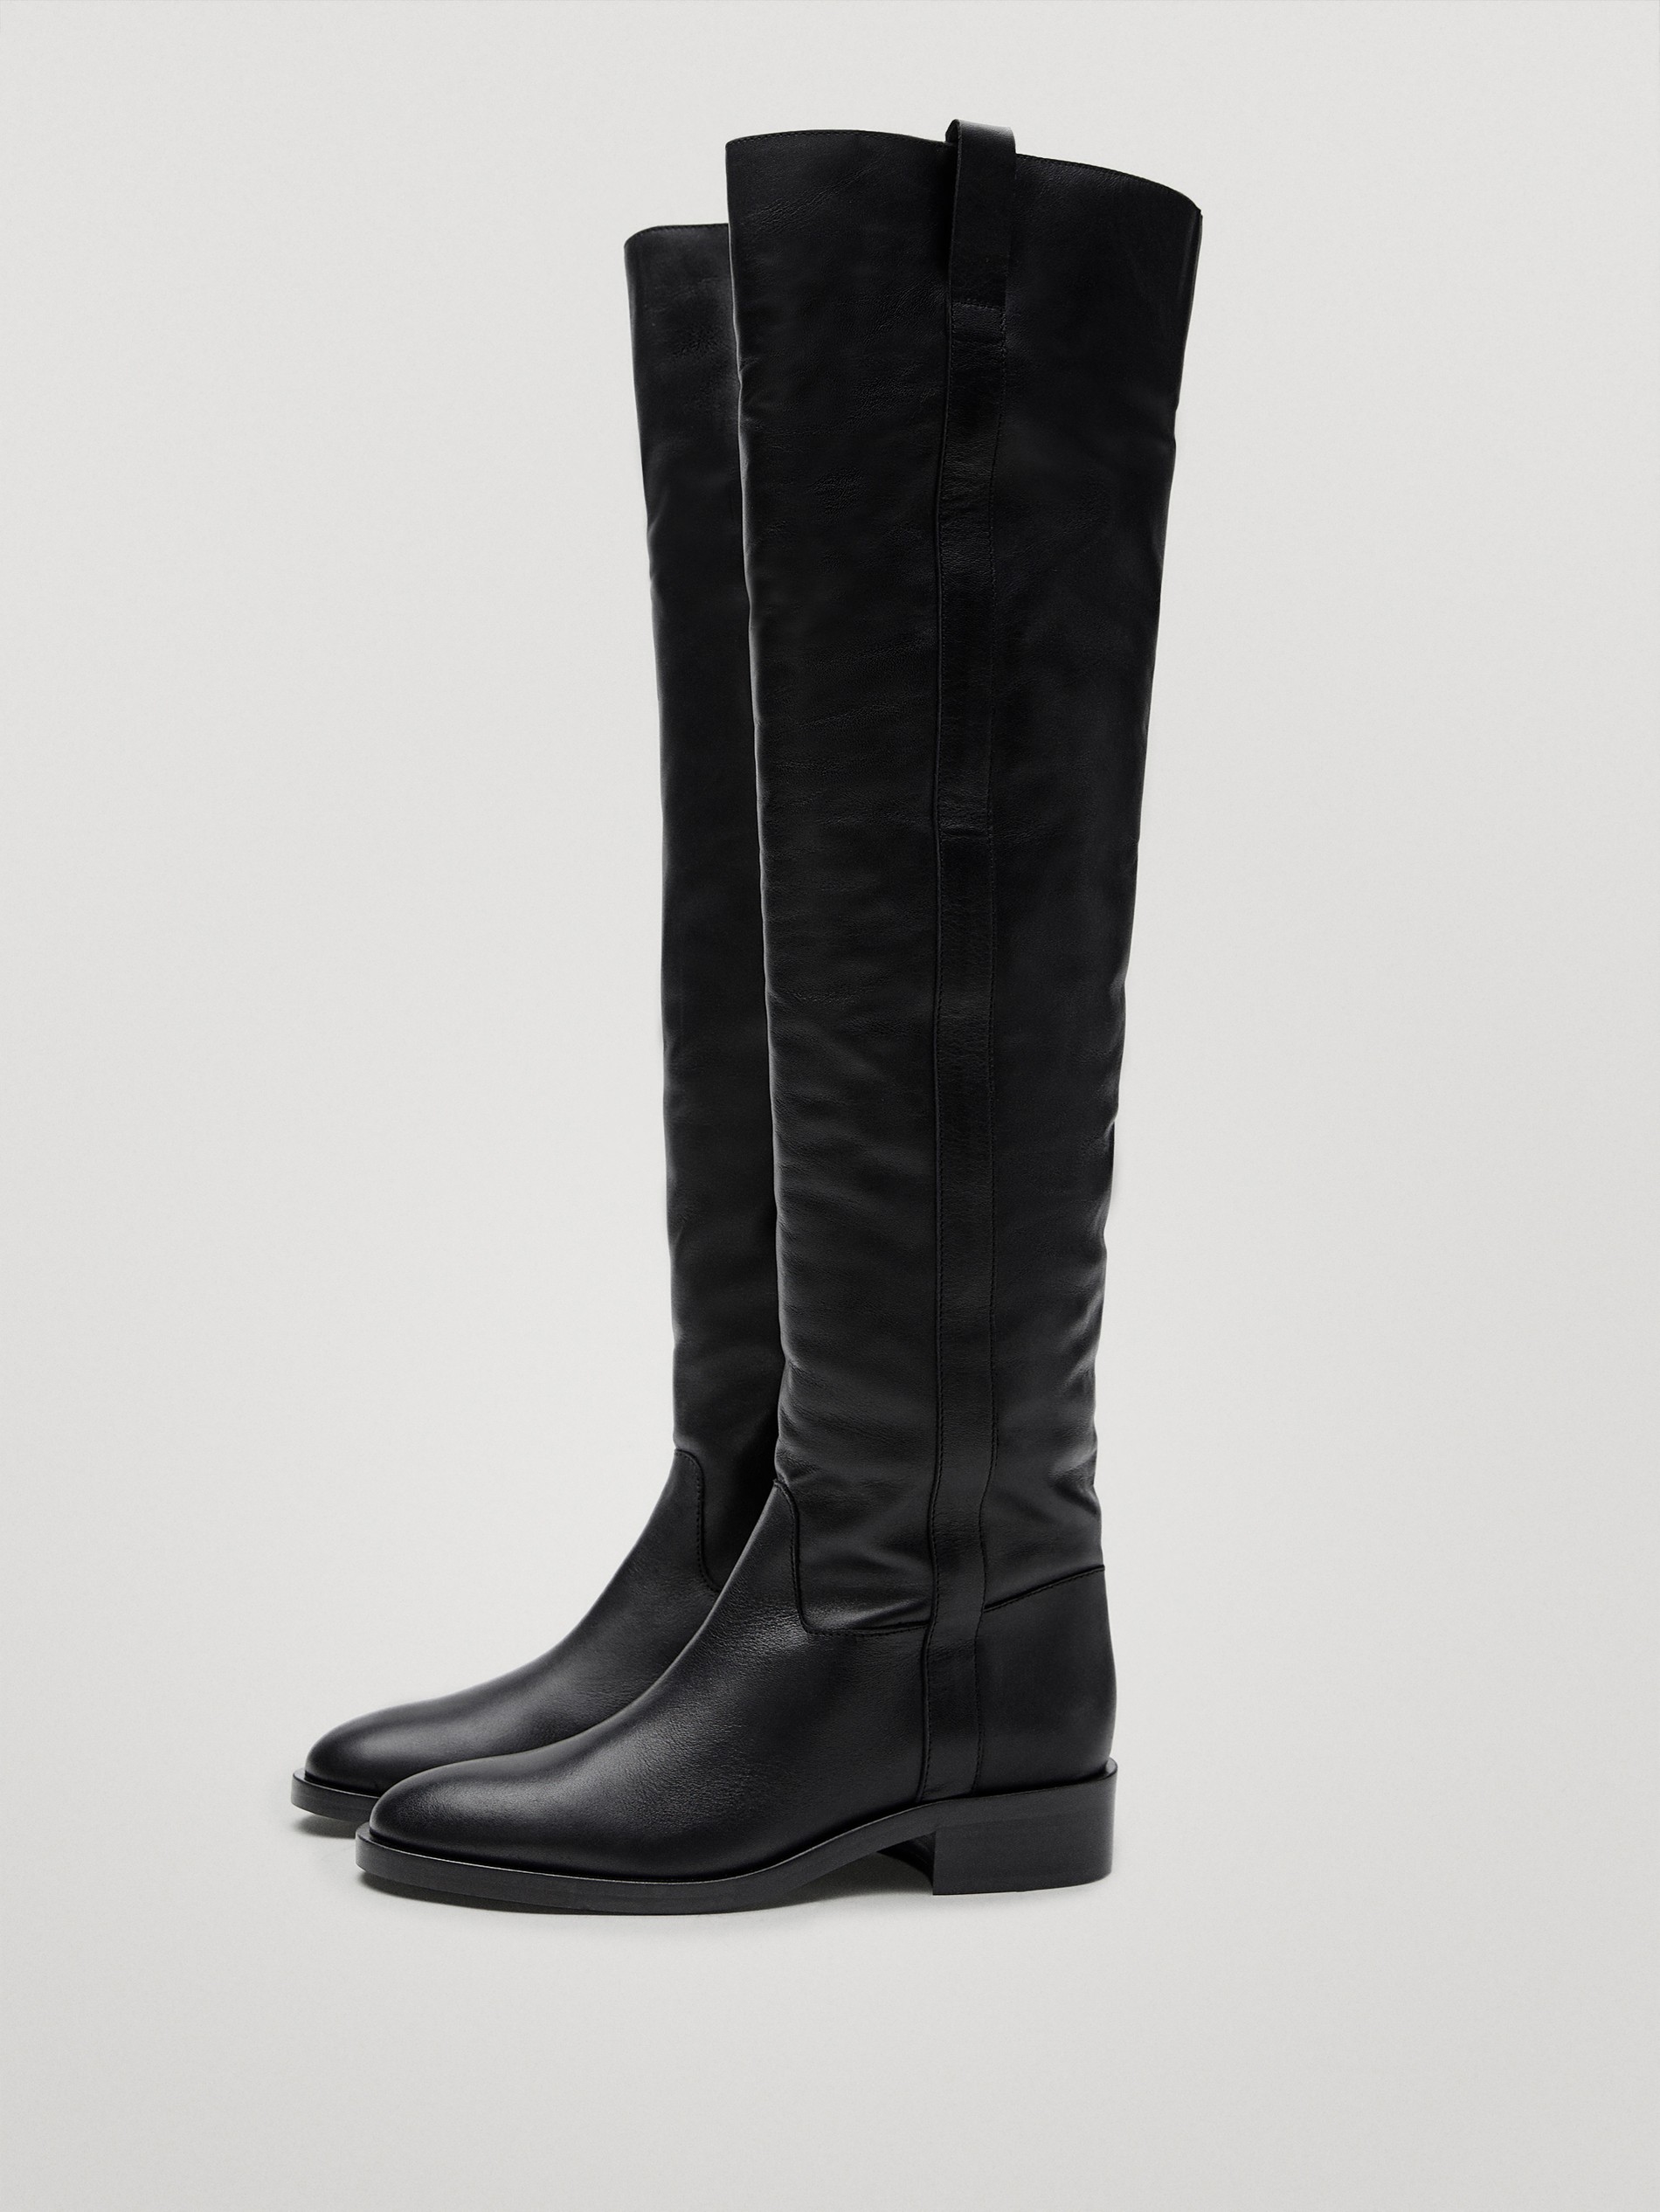 Black lined leather knee-high boots 